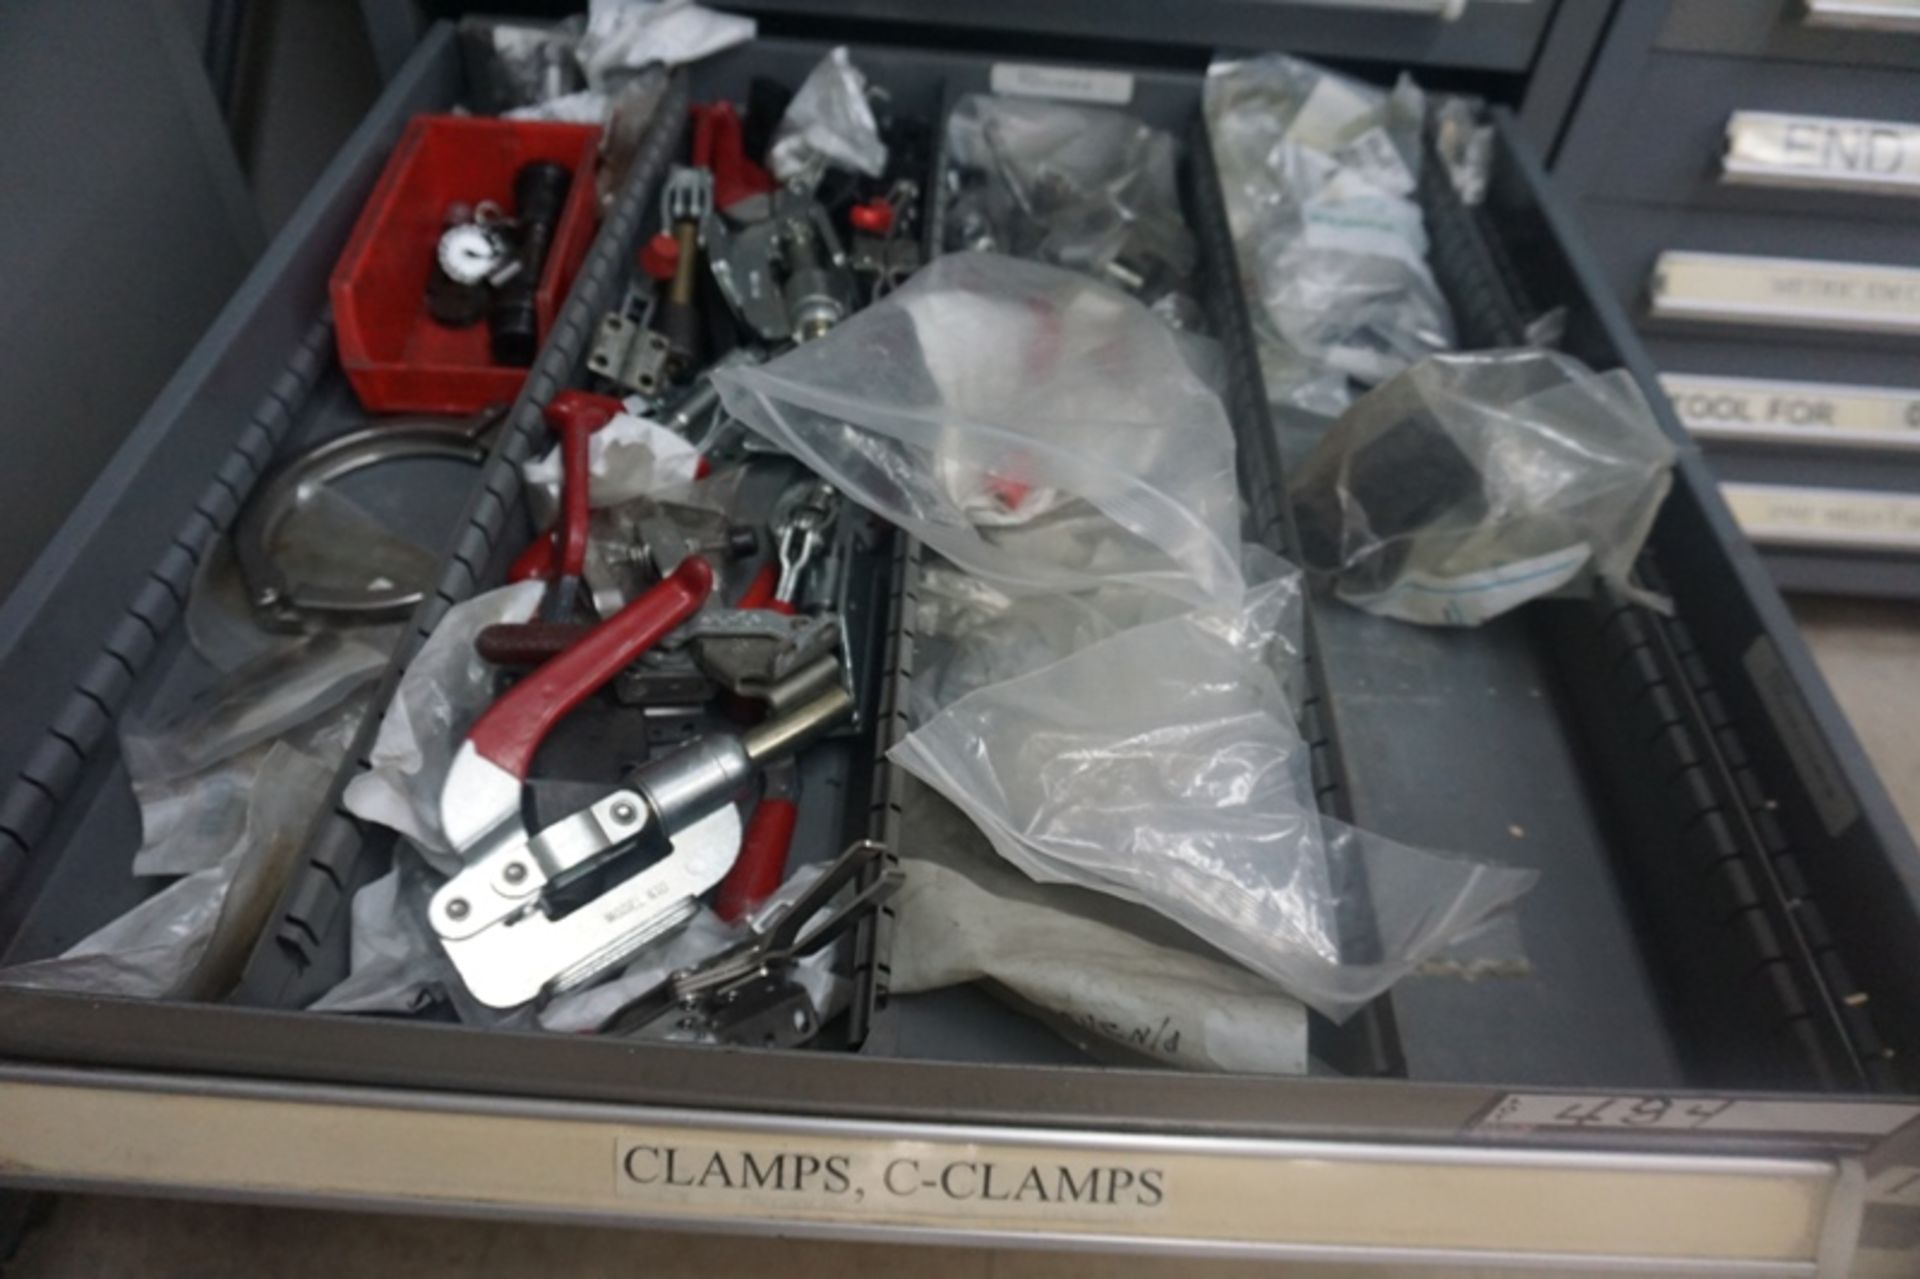 Drawer with Assorted Clamps